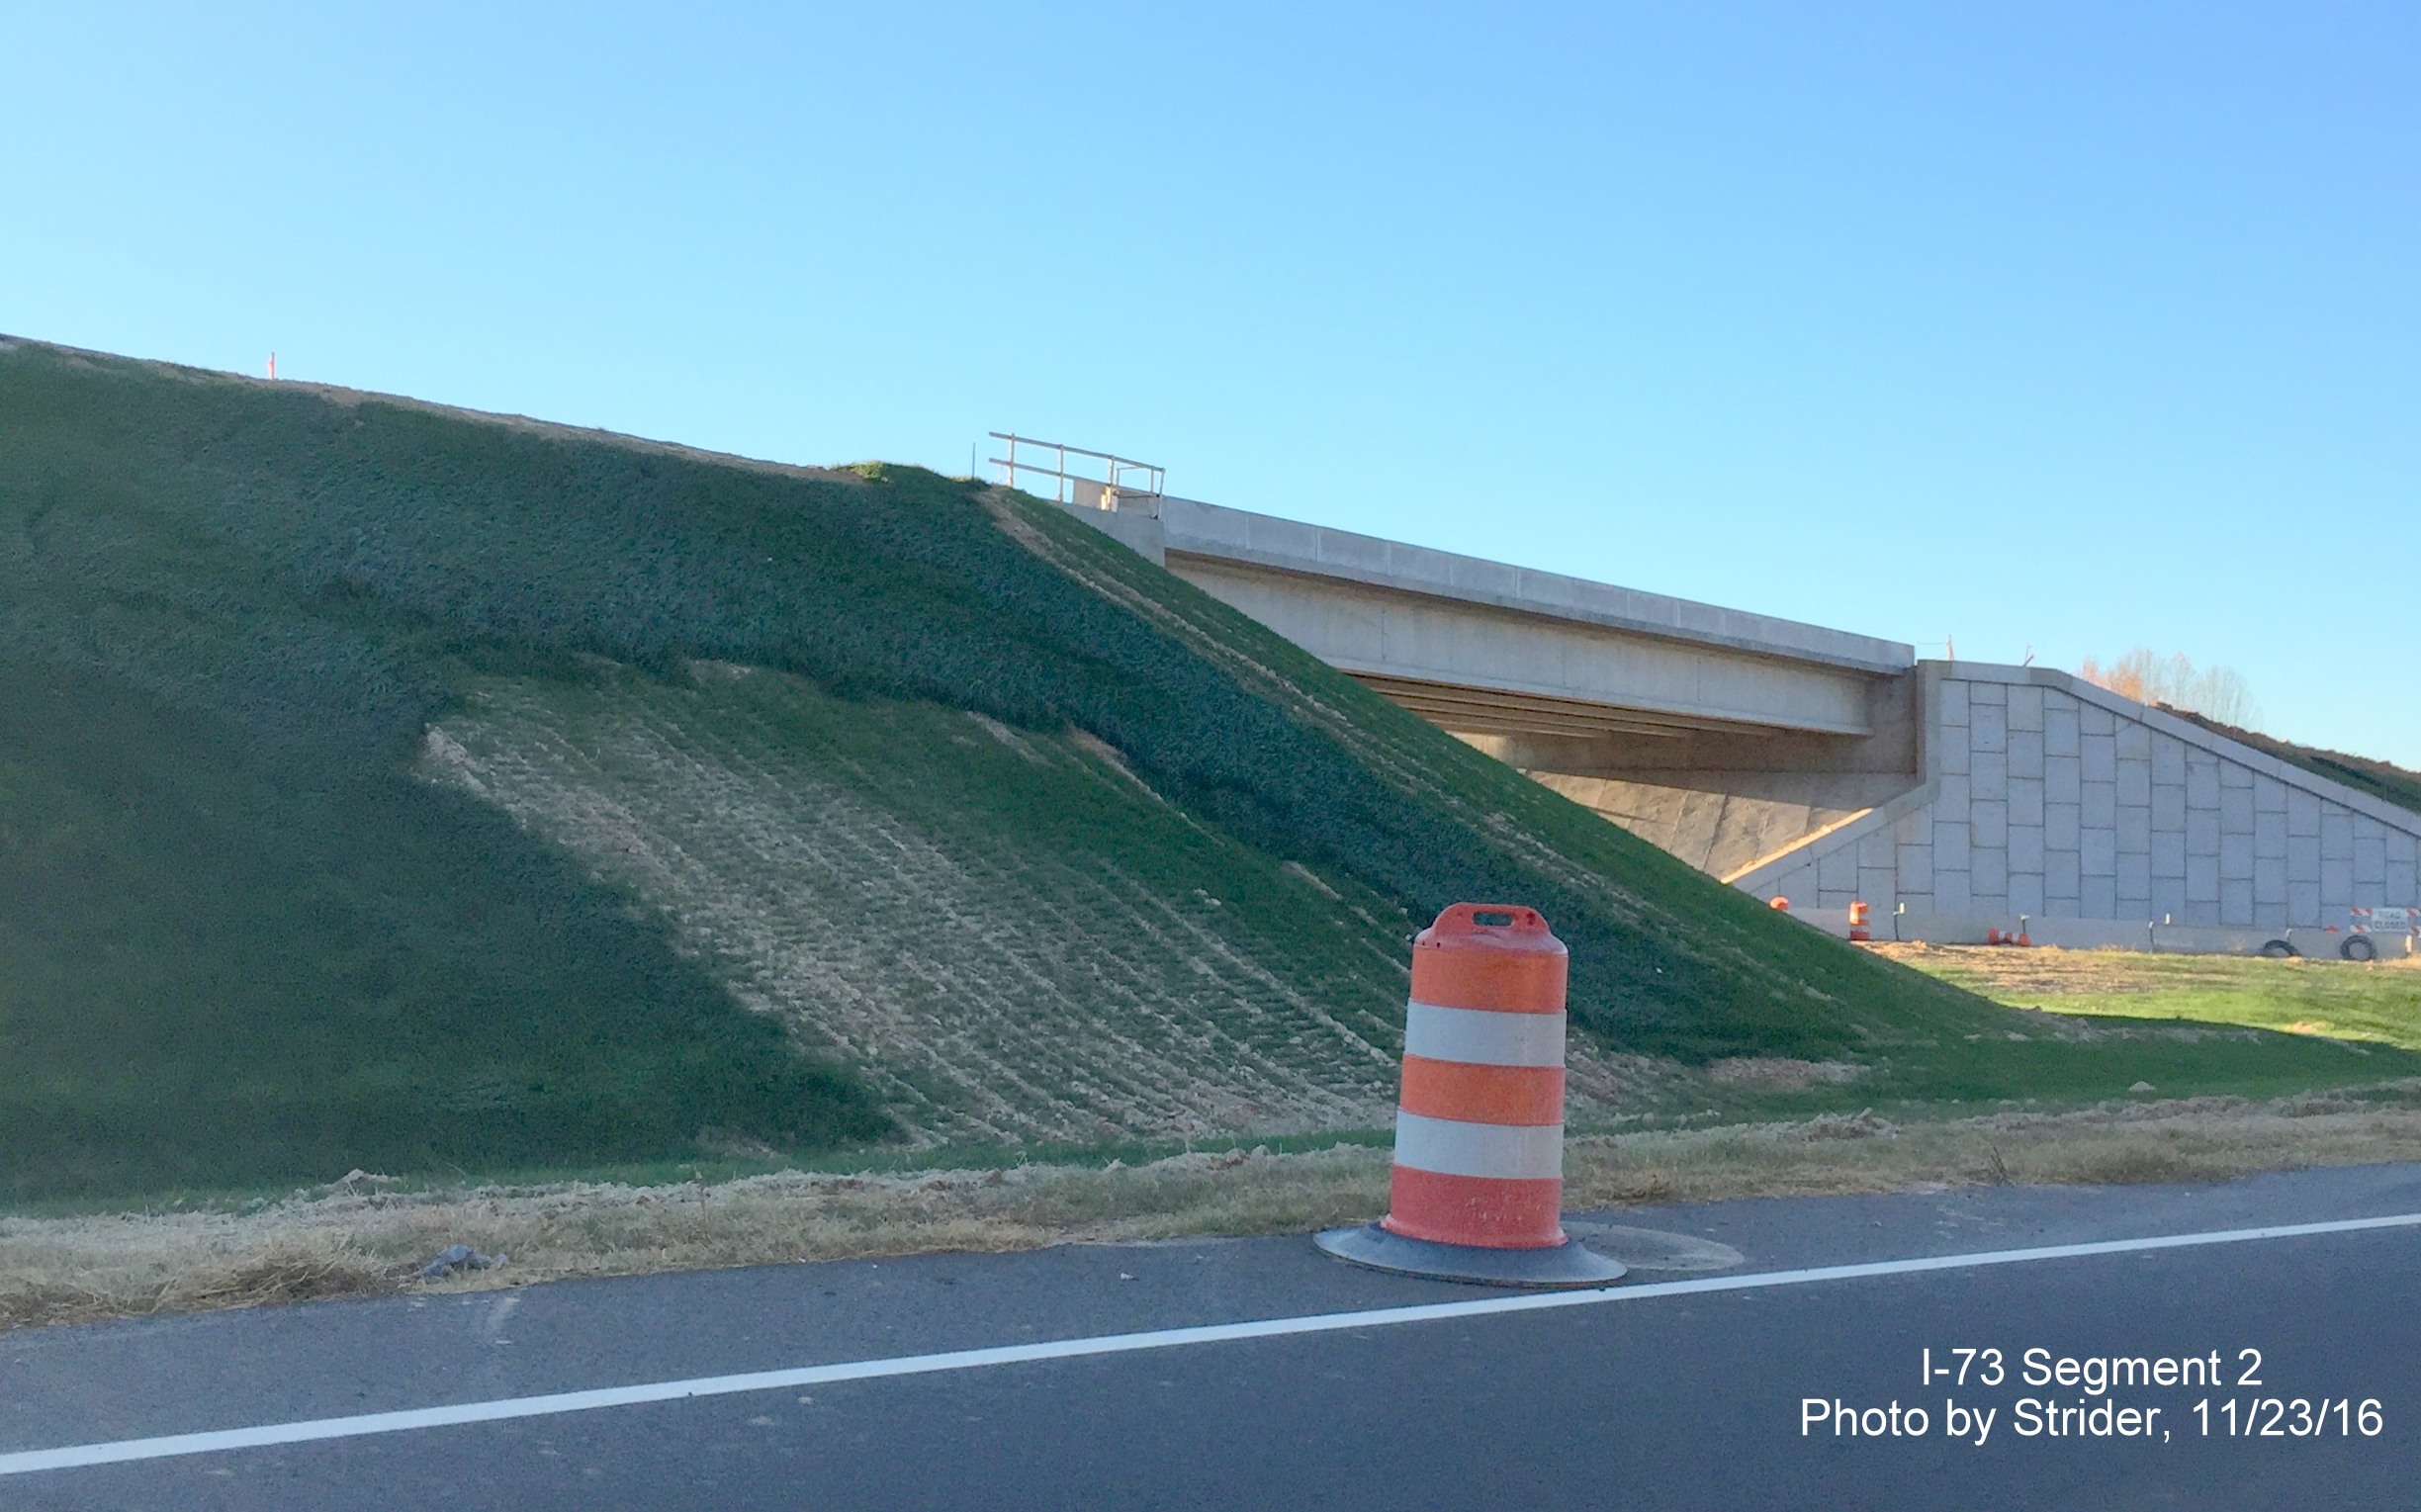 Image showing completed bridge that will take I-73/US 220 South over NC 68 in Rockingham County, by Strider